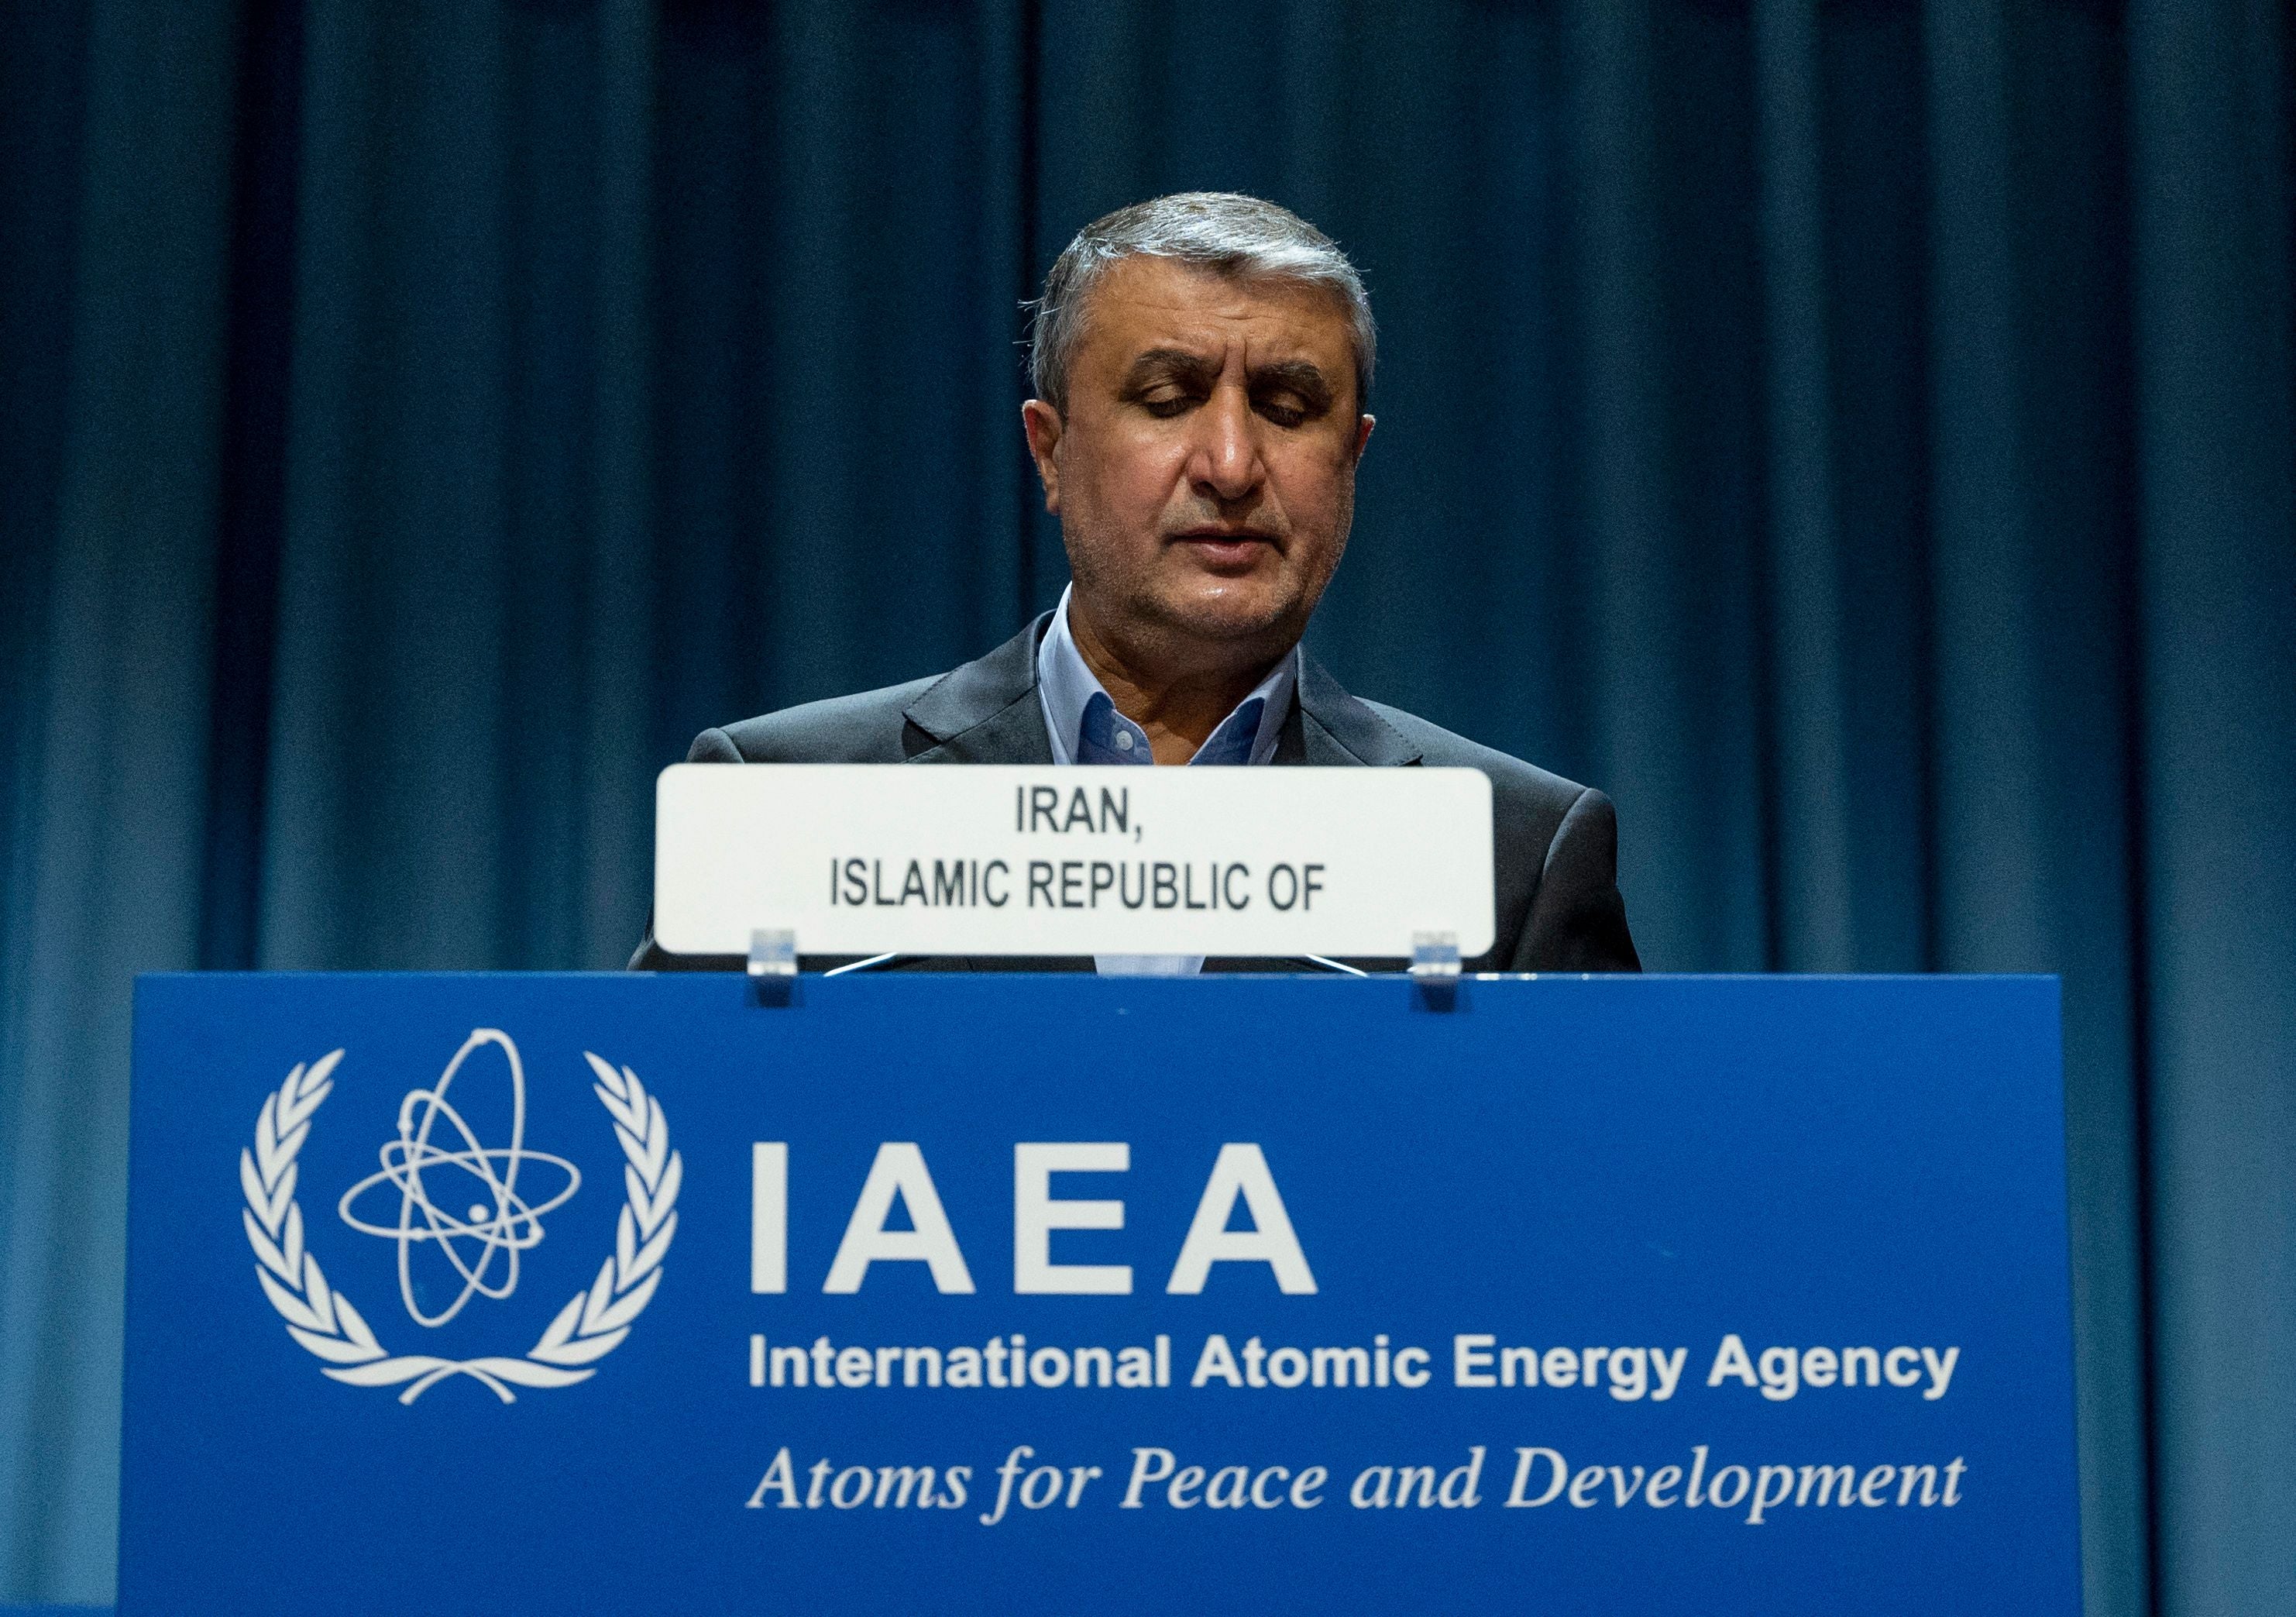 File: Chief of the Atomic Energy Organization of Iran Mohammad Eslami delivers a speech during the International Atomic Energy Agency General Conference in Vienna